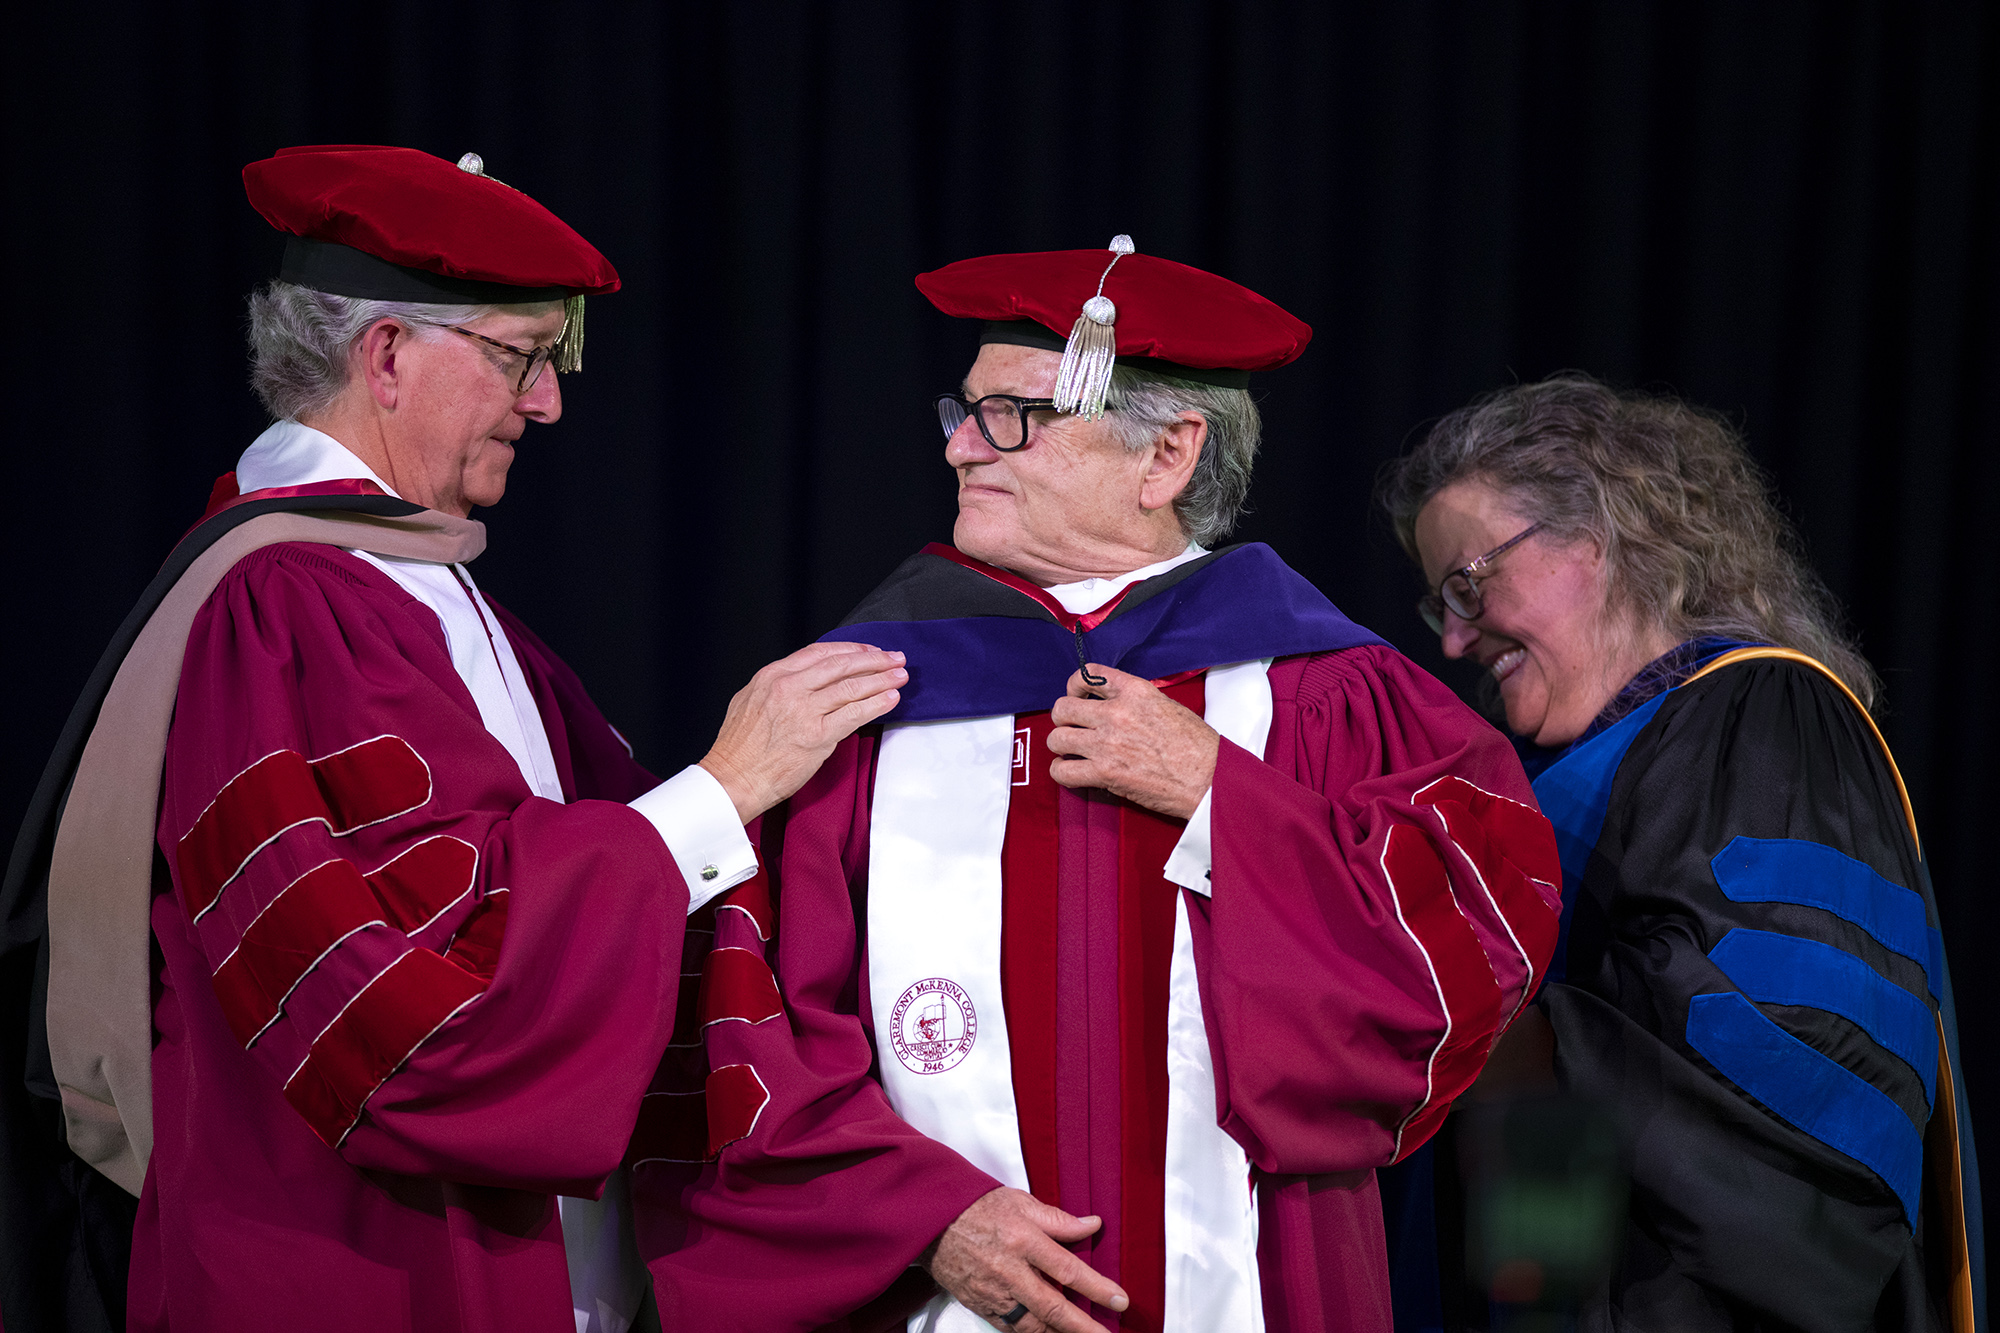 Christopher V. Walker ’69 receives his Honorary Doctor of Laws degree at 2022 Commencement.